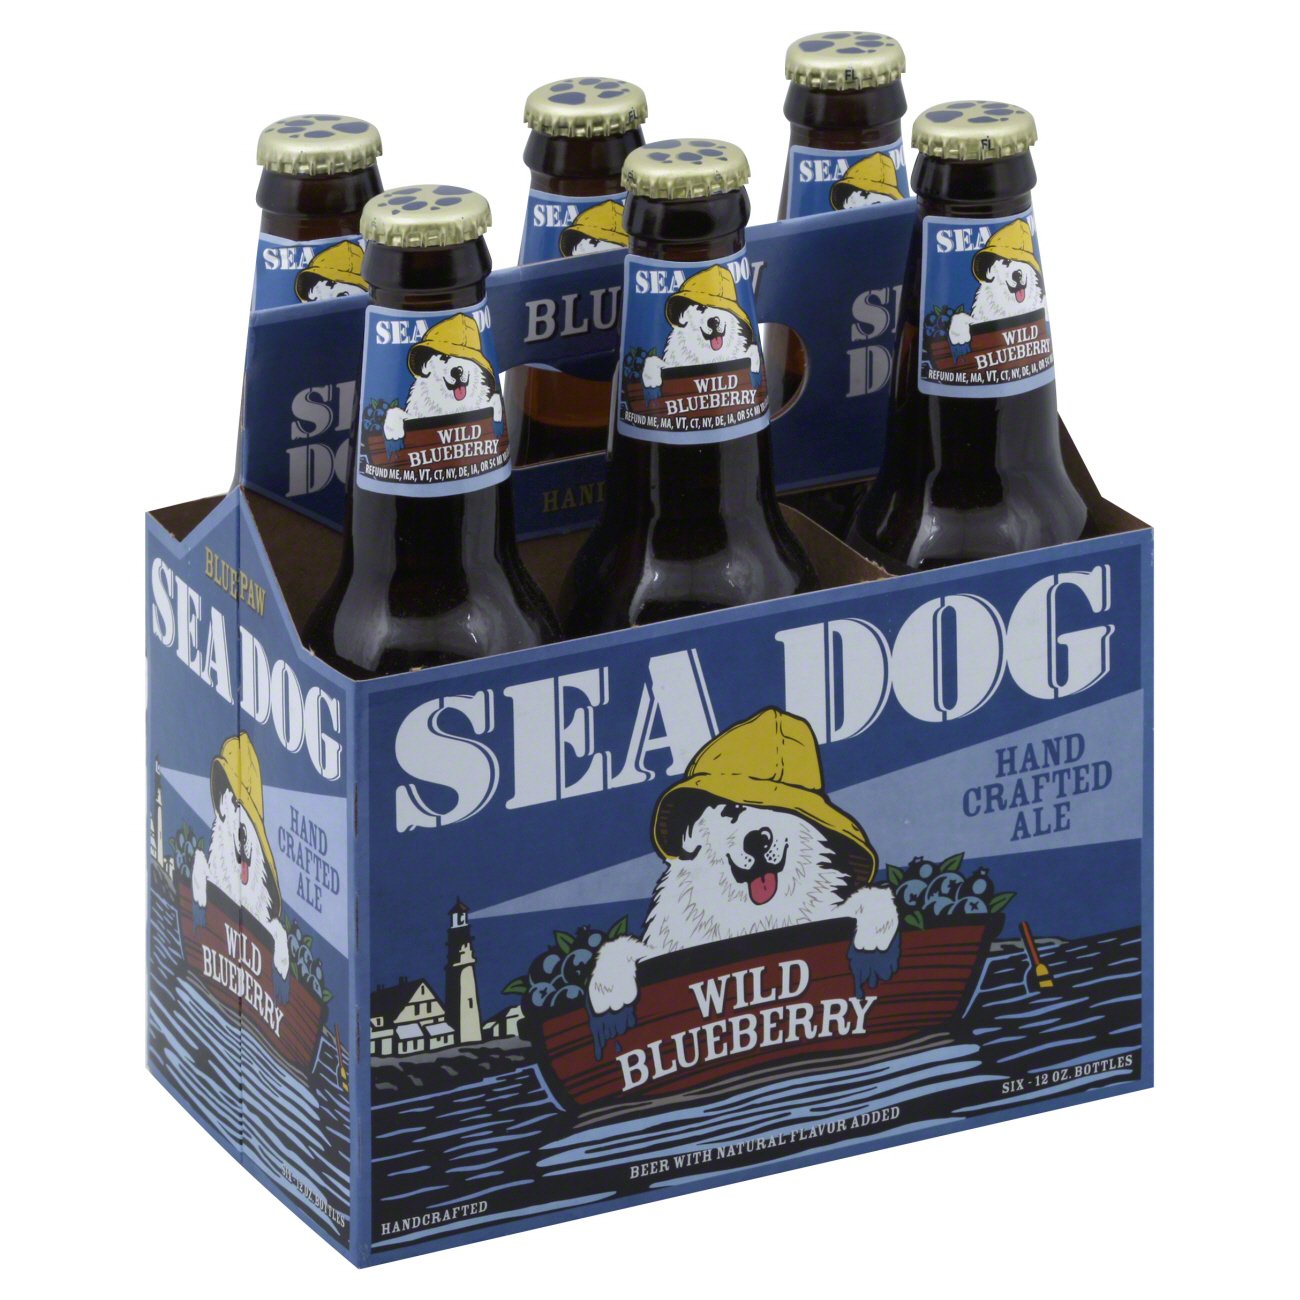 Sea Dog Wild Blueberry Wheat Ale Beer, Glass Bottles - Shop Beer at H-E-B